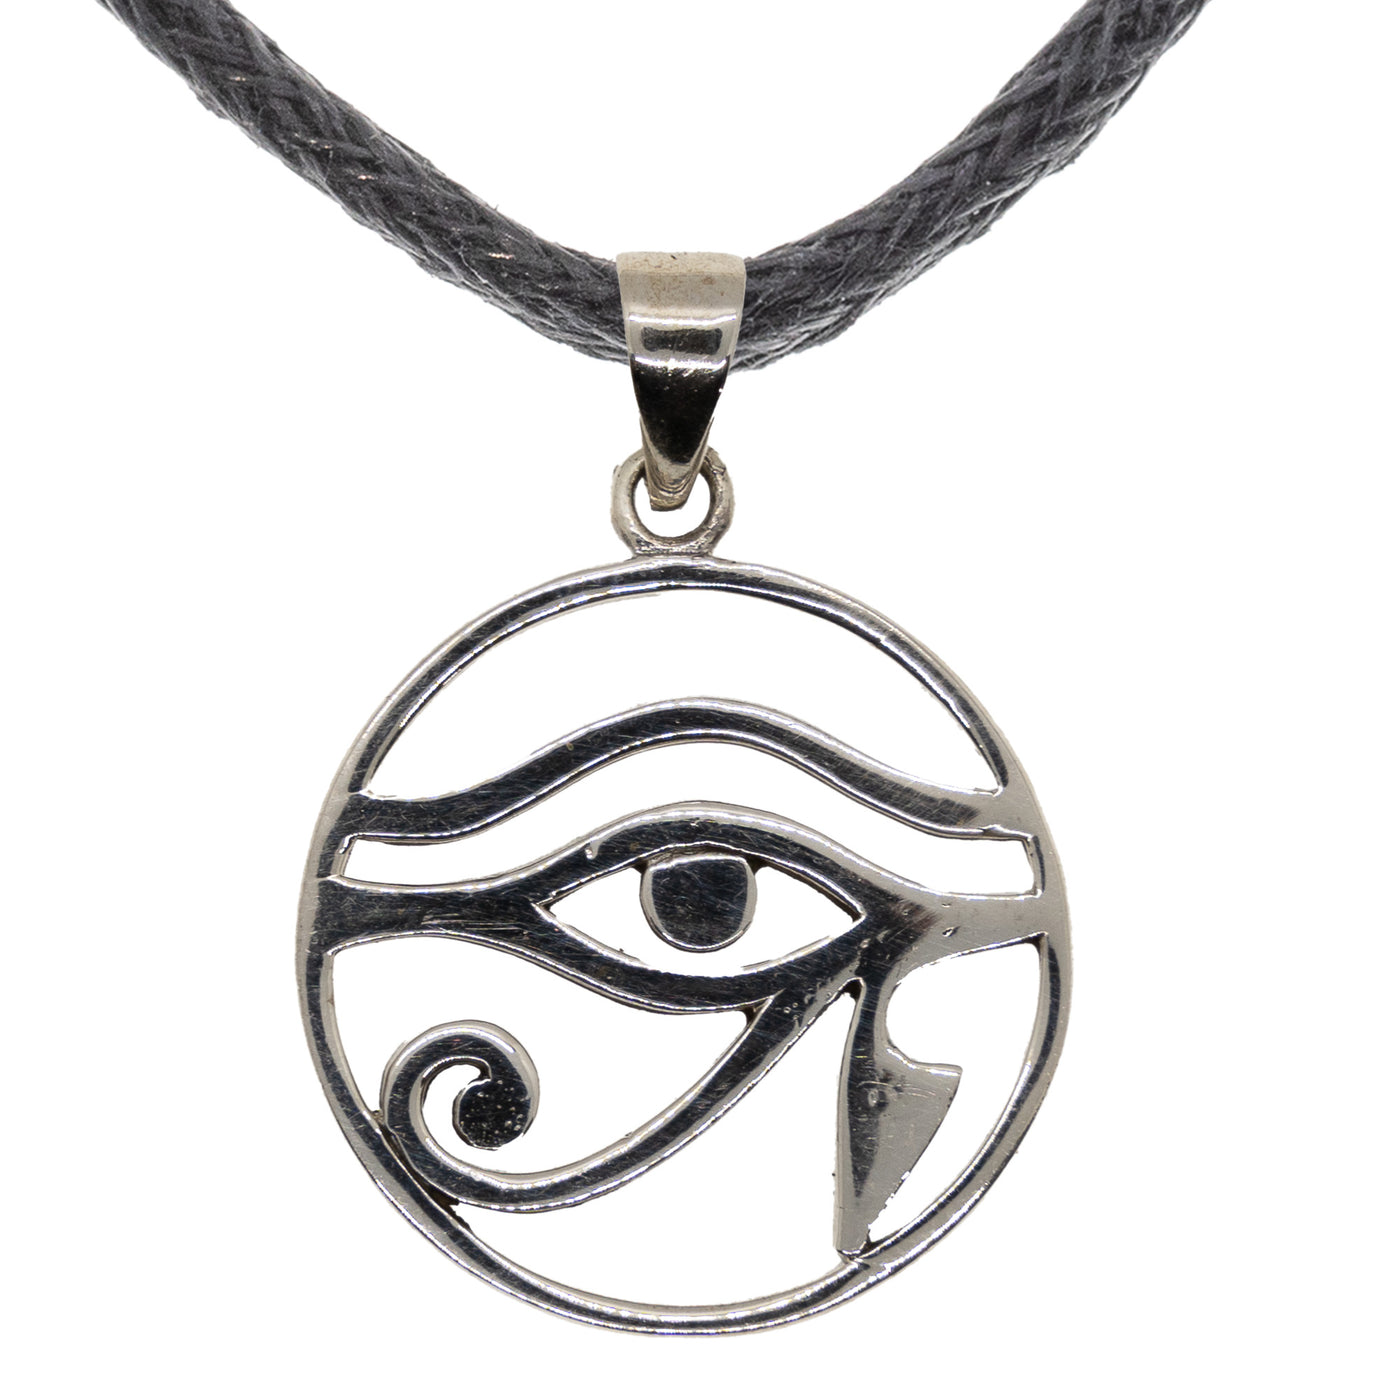 Eye of horus pendant 925 sterling silver, supplied on a bootlace cord, or you can buy a silver chain from our shop